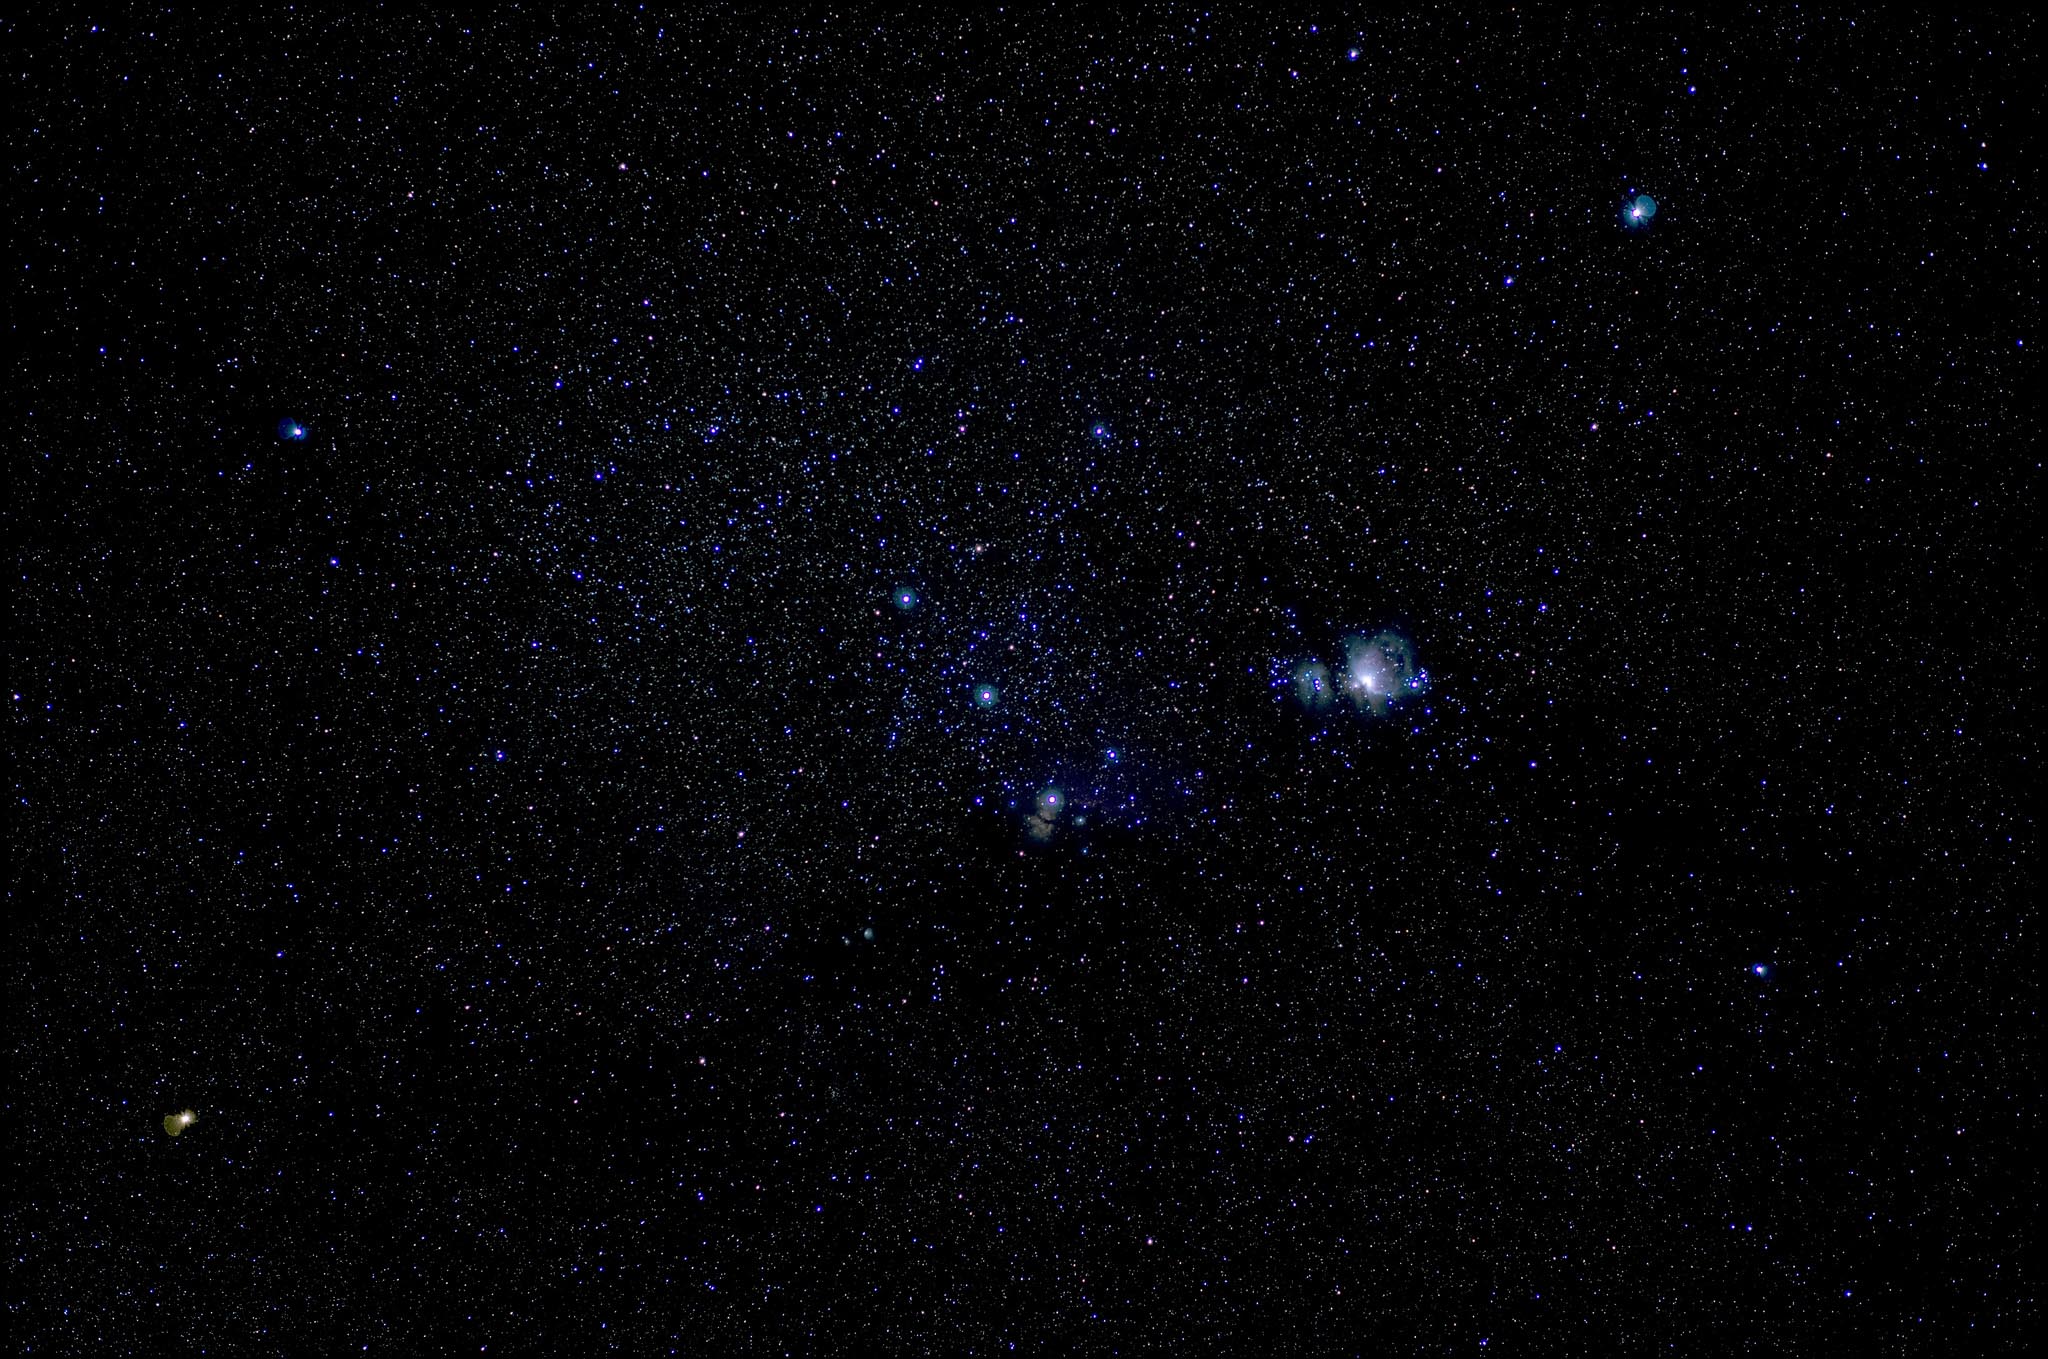 The Constellation of Orion